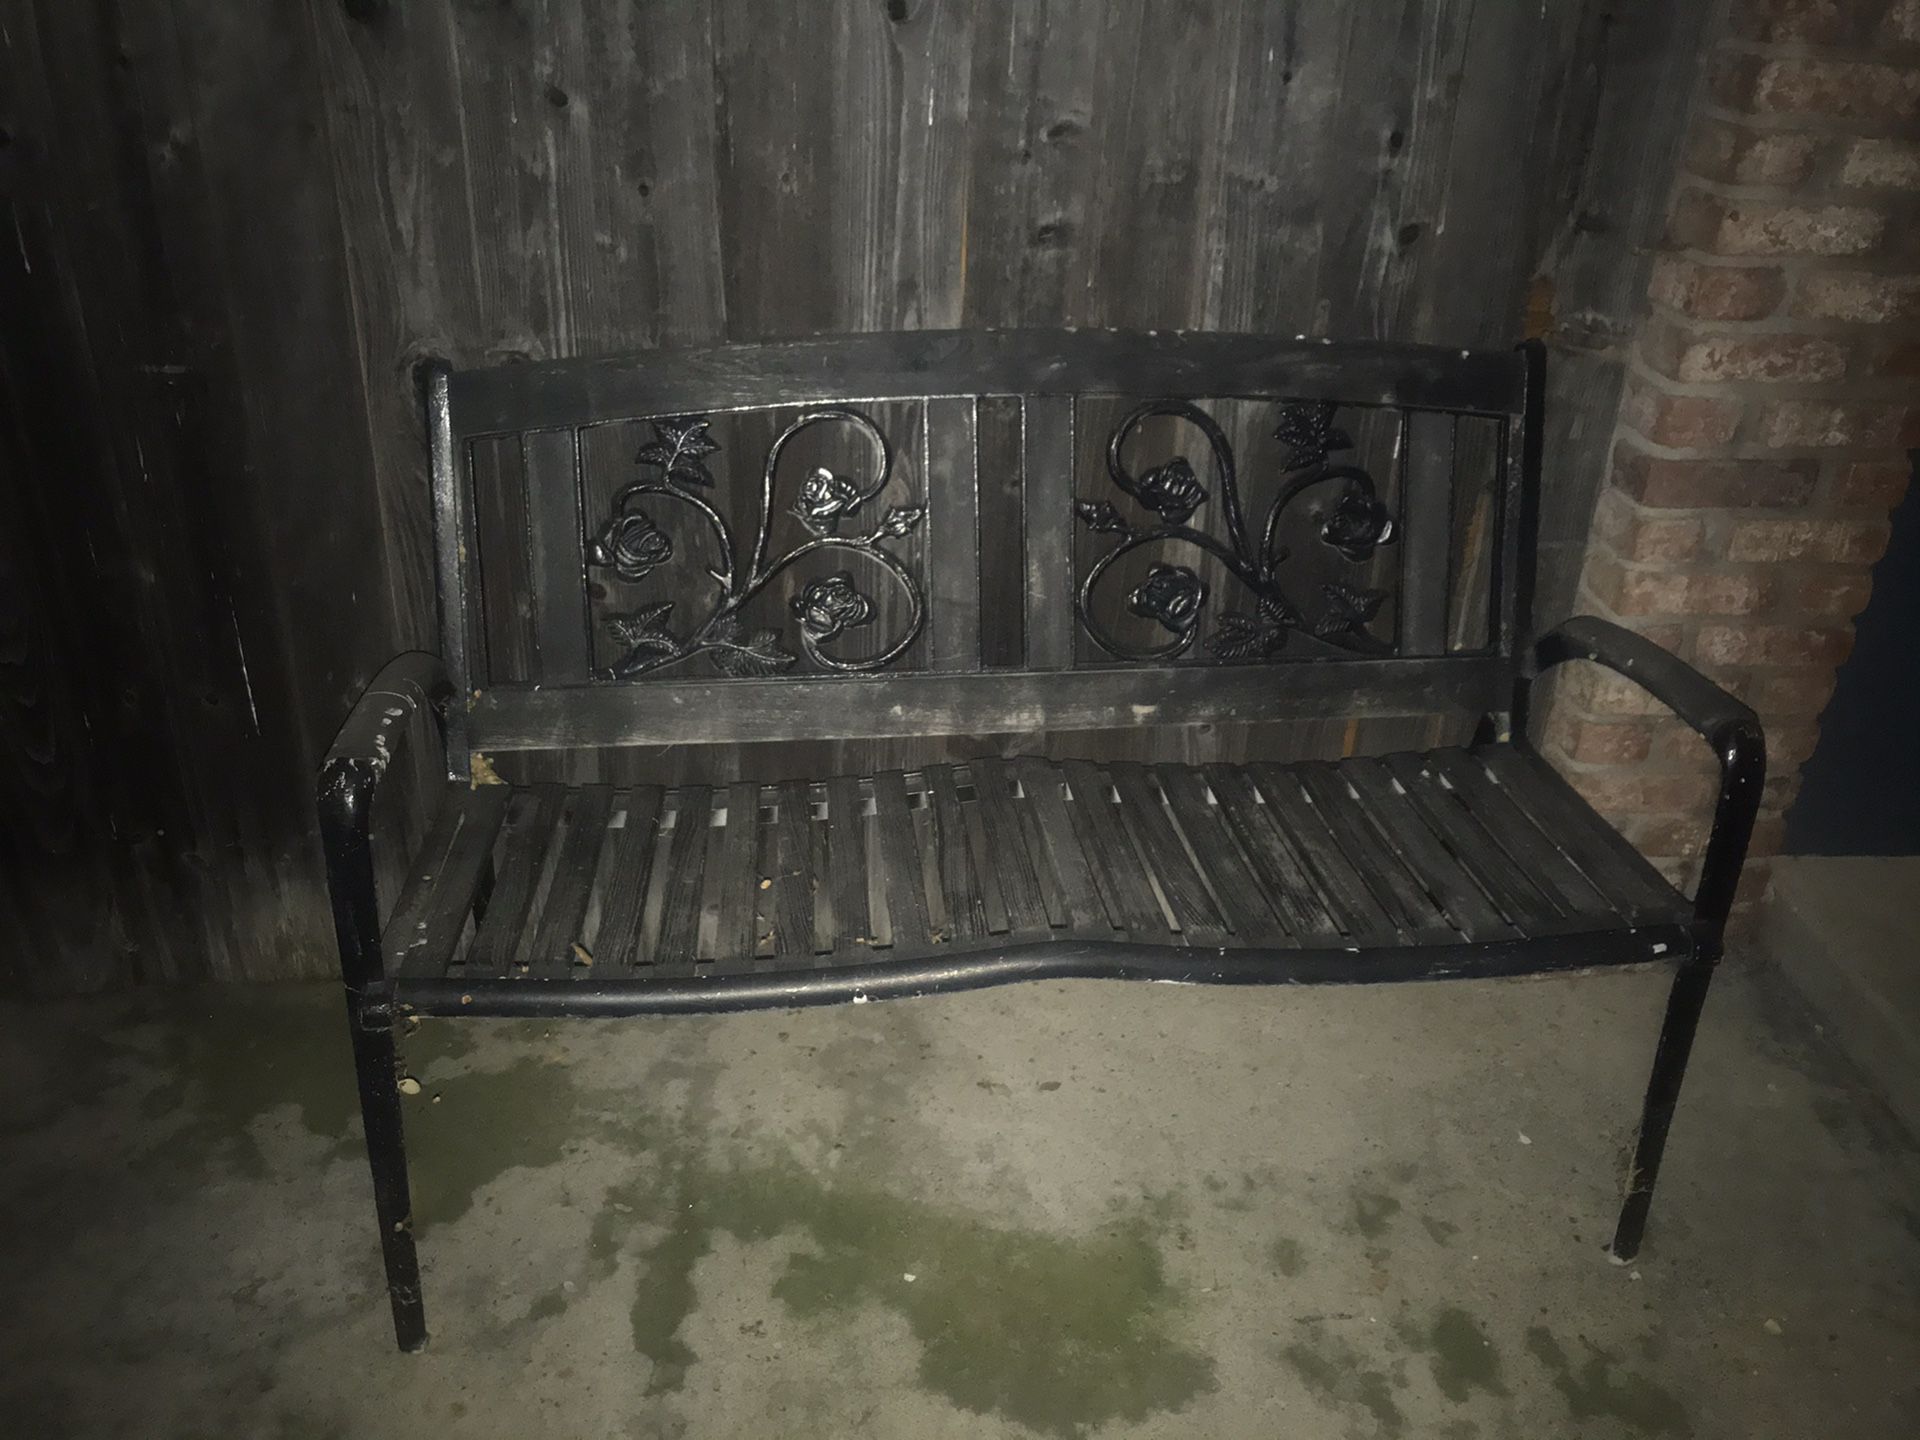 Iron and wood bench